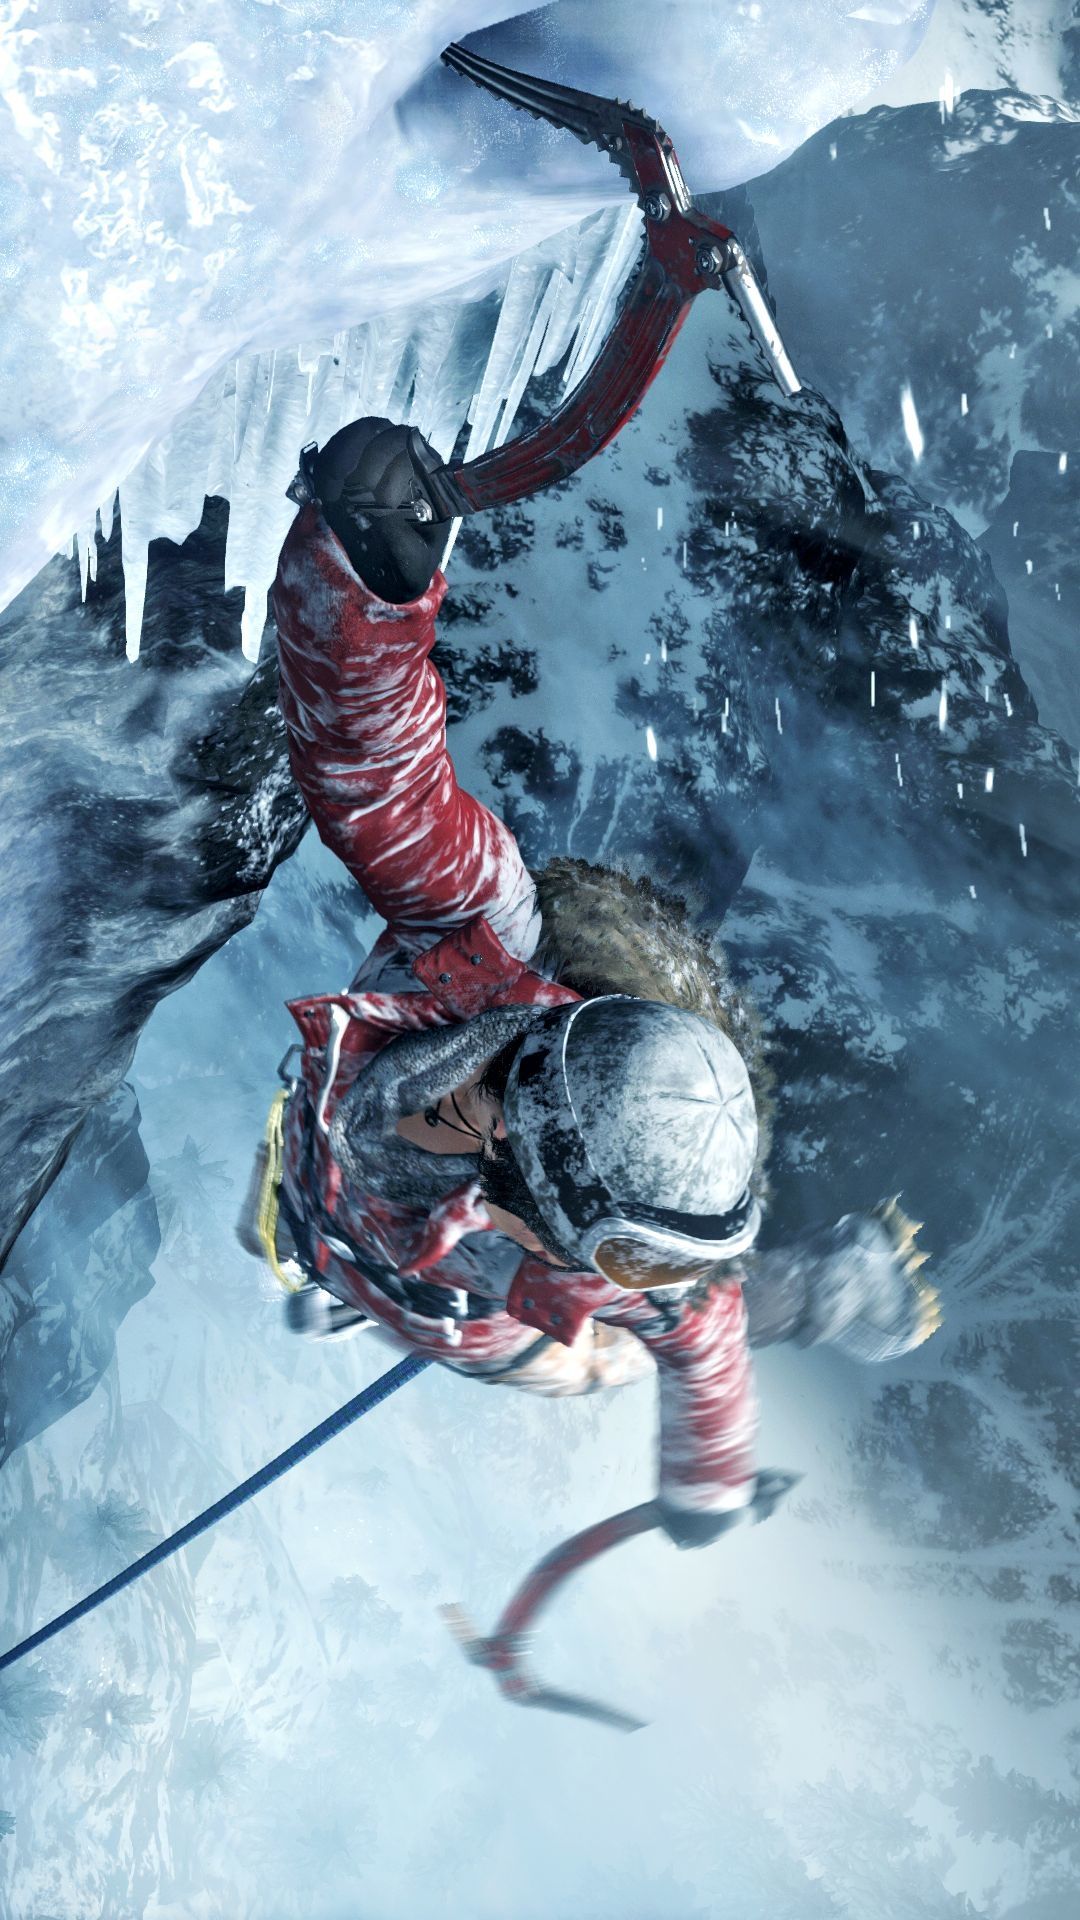 Rise of the Tomb Raider - 9